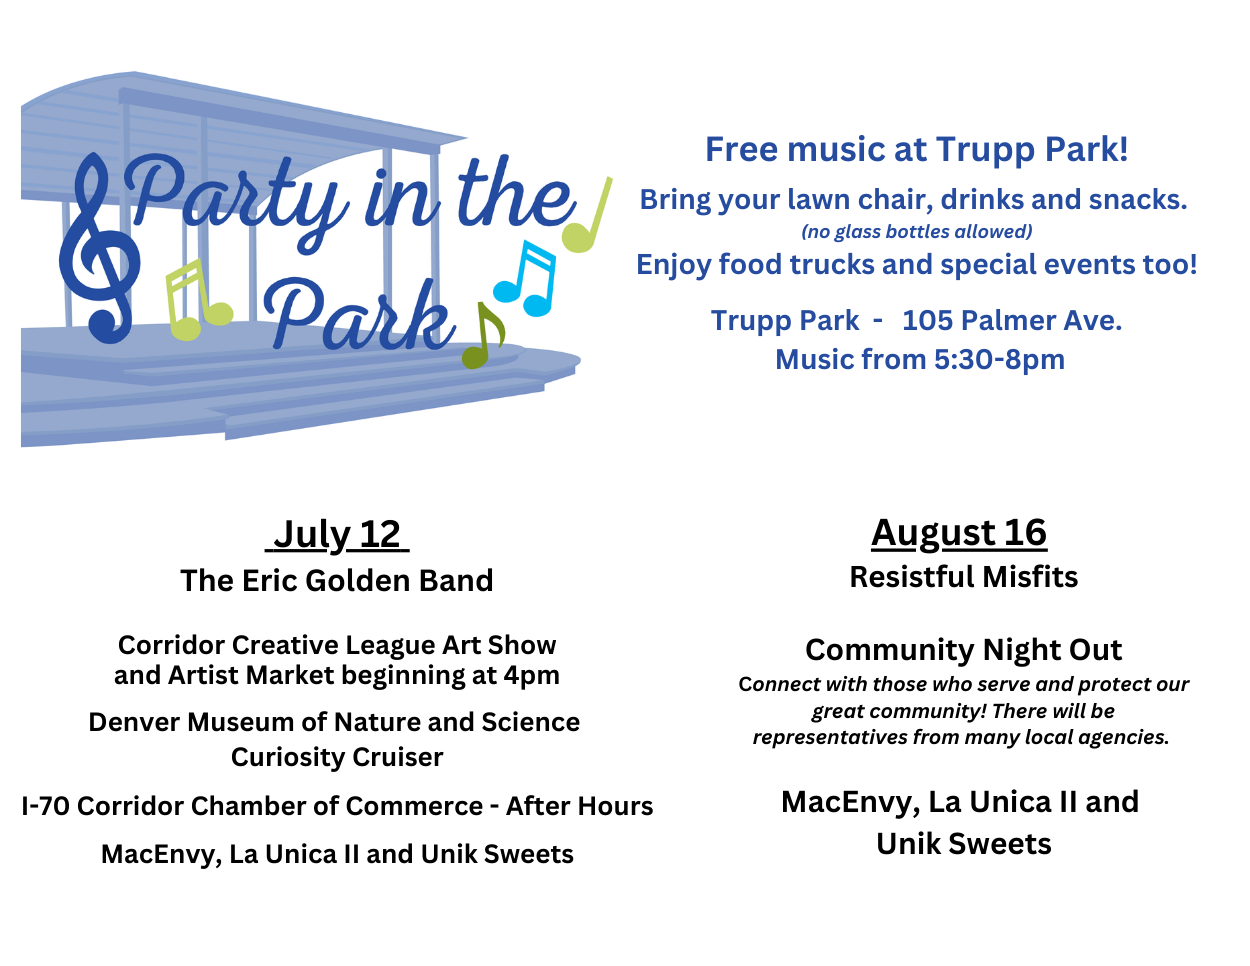 Party in the Park logo with dates for live entertainment and info about food trucks and activities.